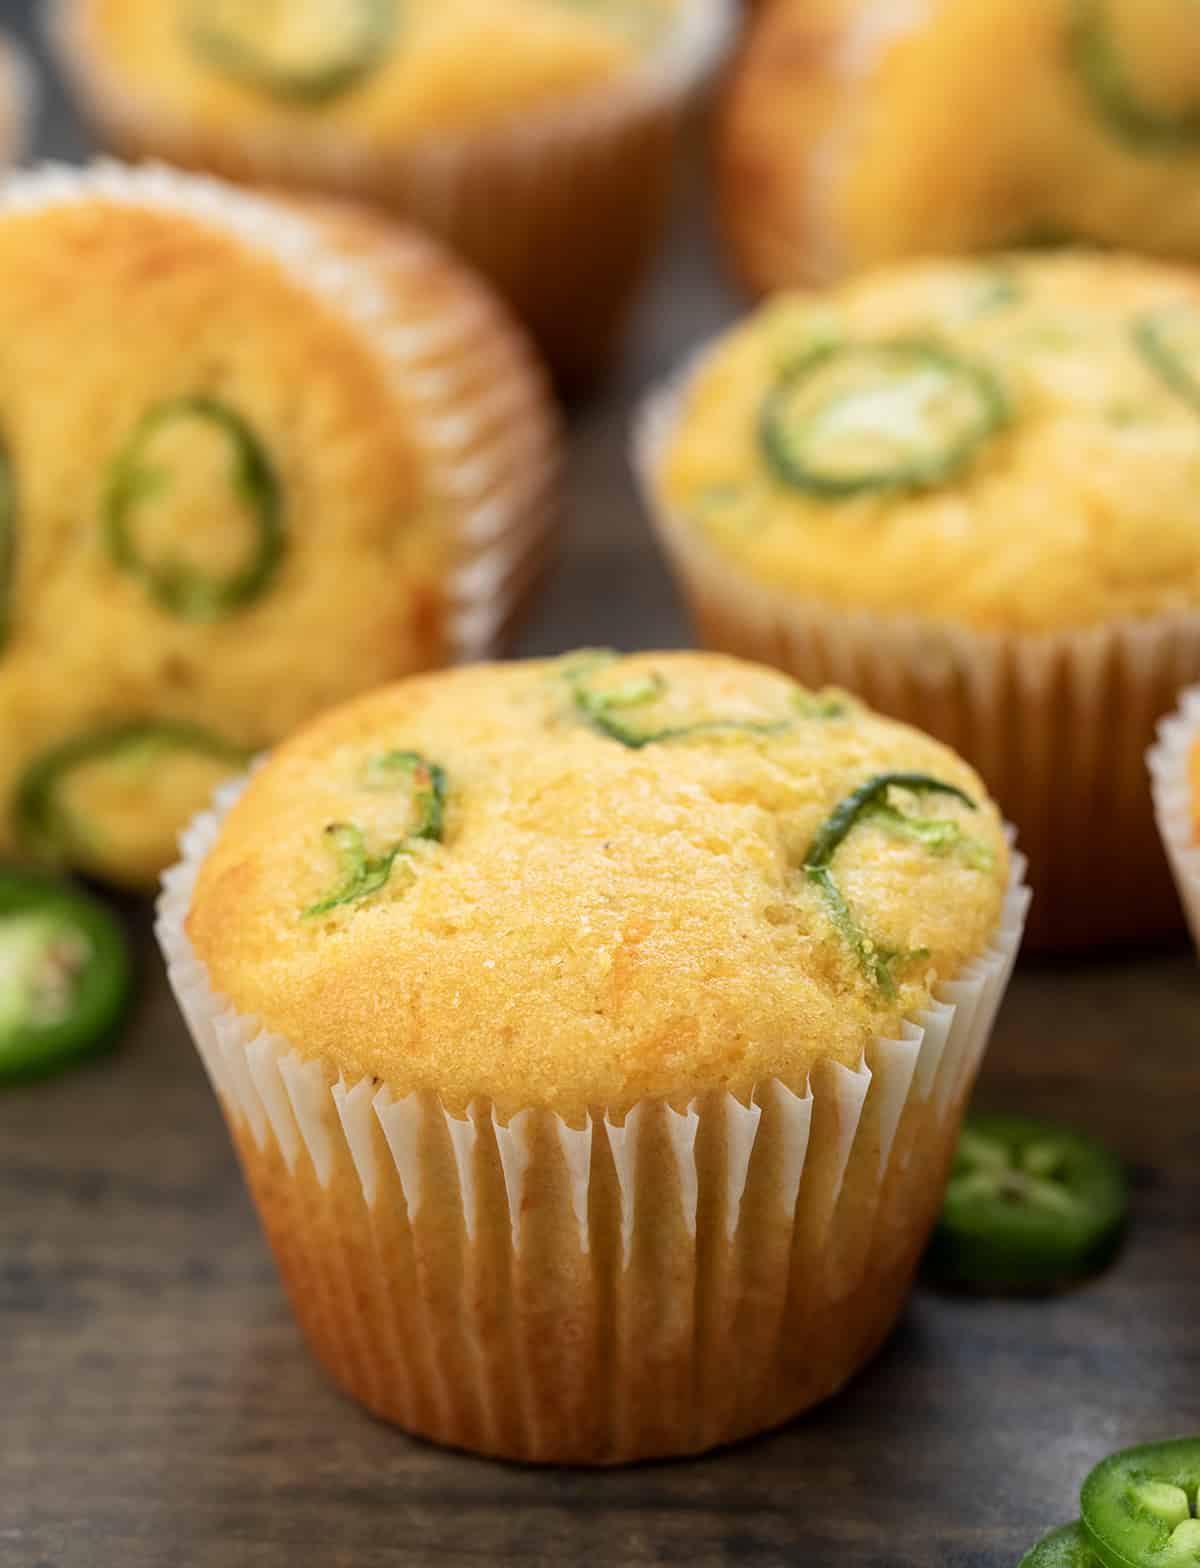 A Jalapeno Cheddar Cornbread Muffin on a wooden table in front of other muffins.